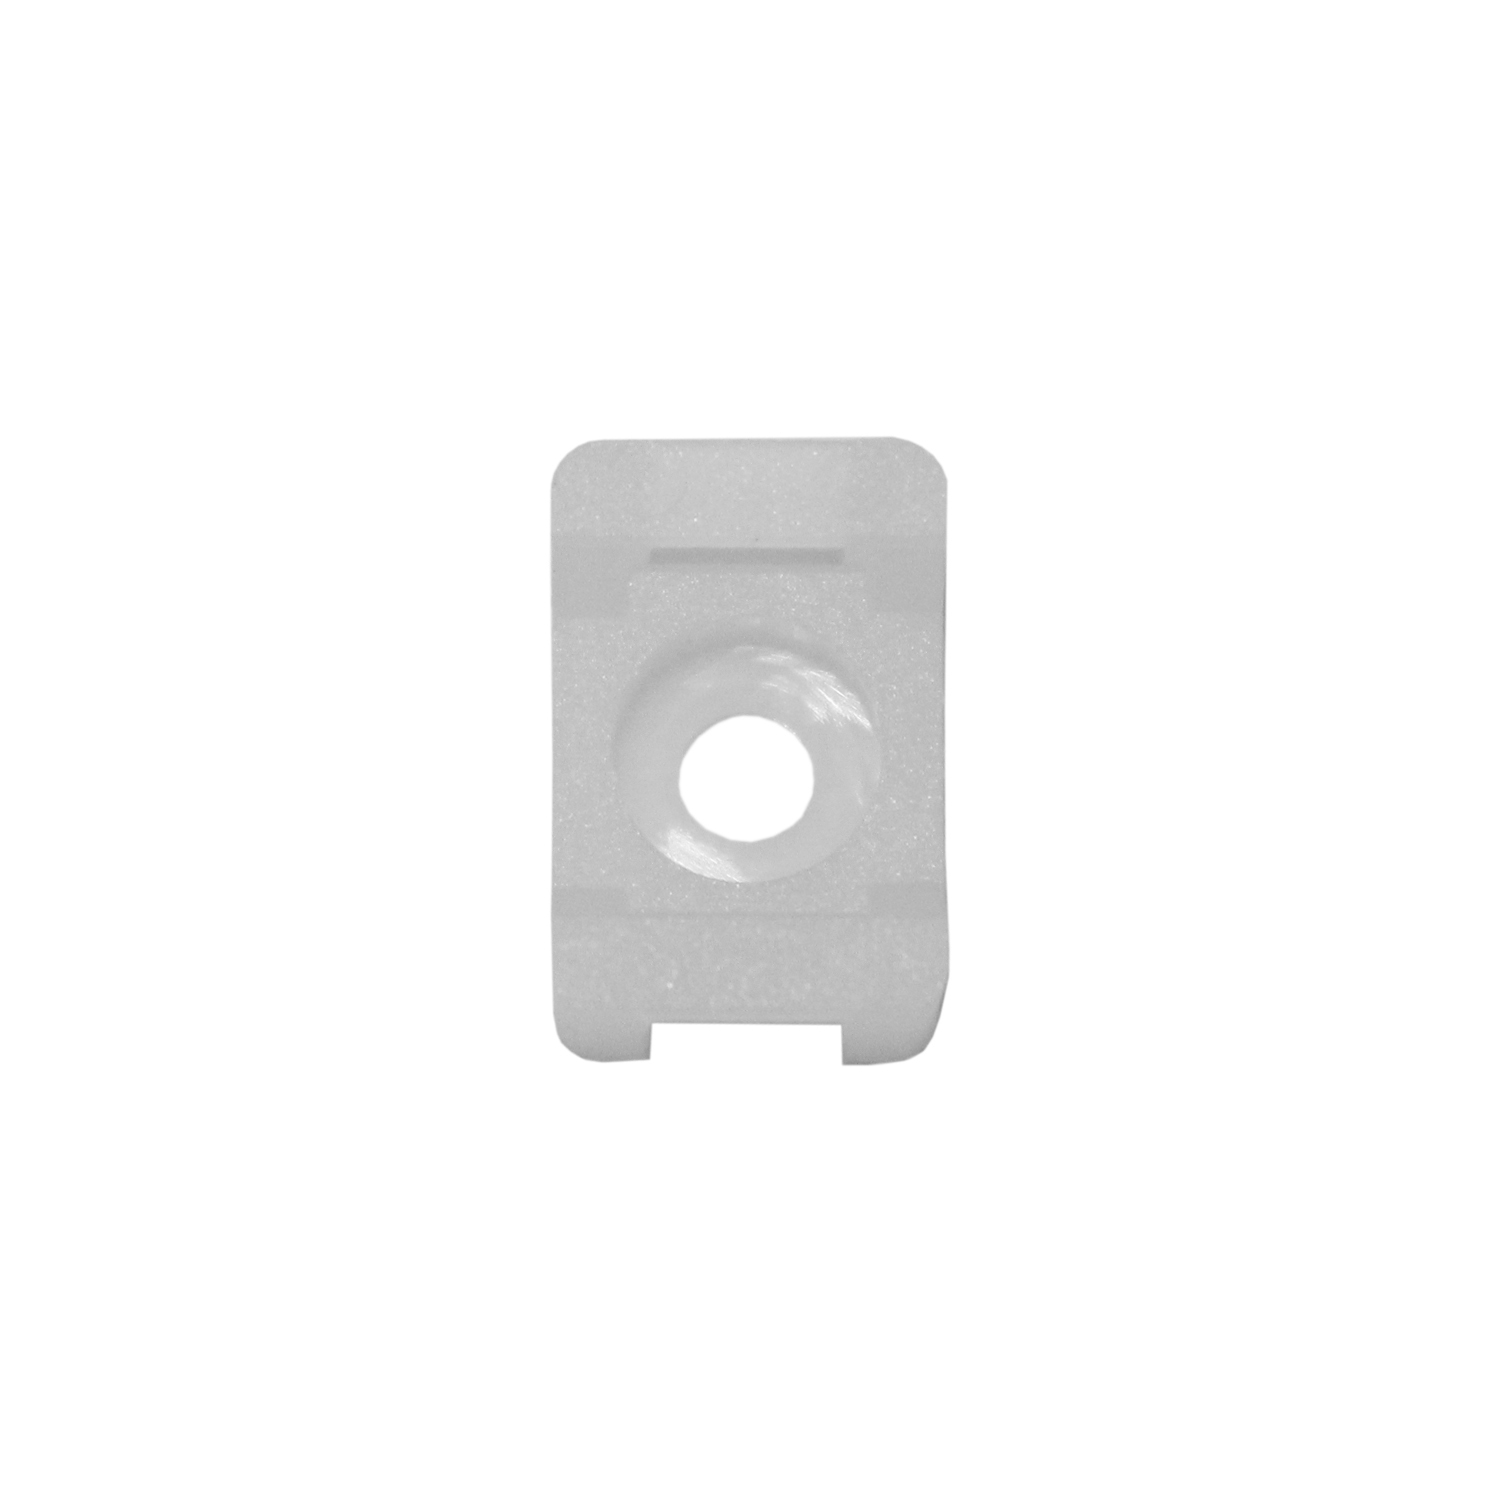 QualGear 8 mm Cable Clips, White, 100-Pack CC8-W-100-P - The Home